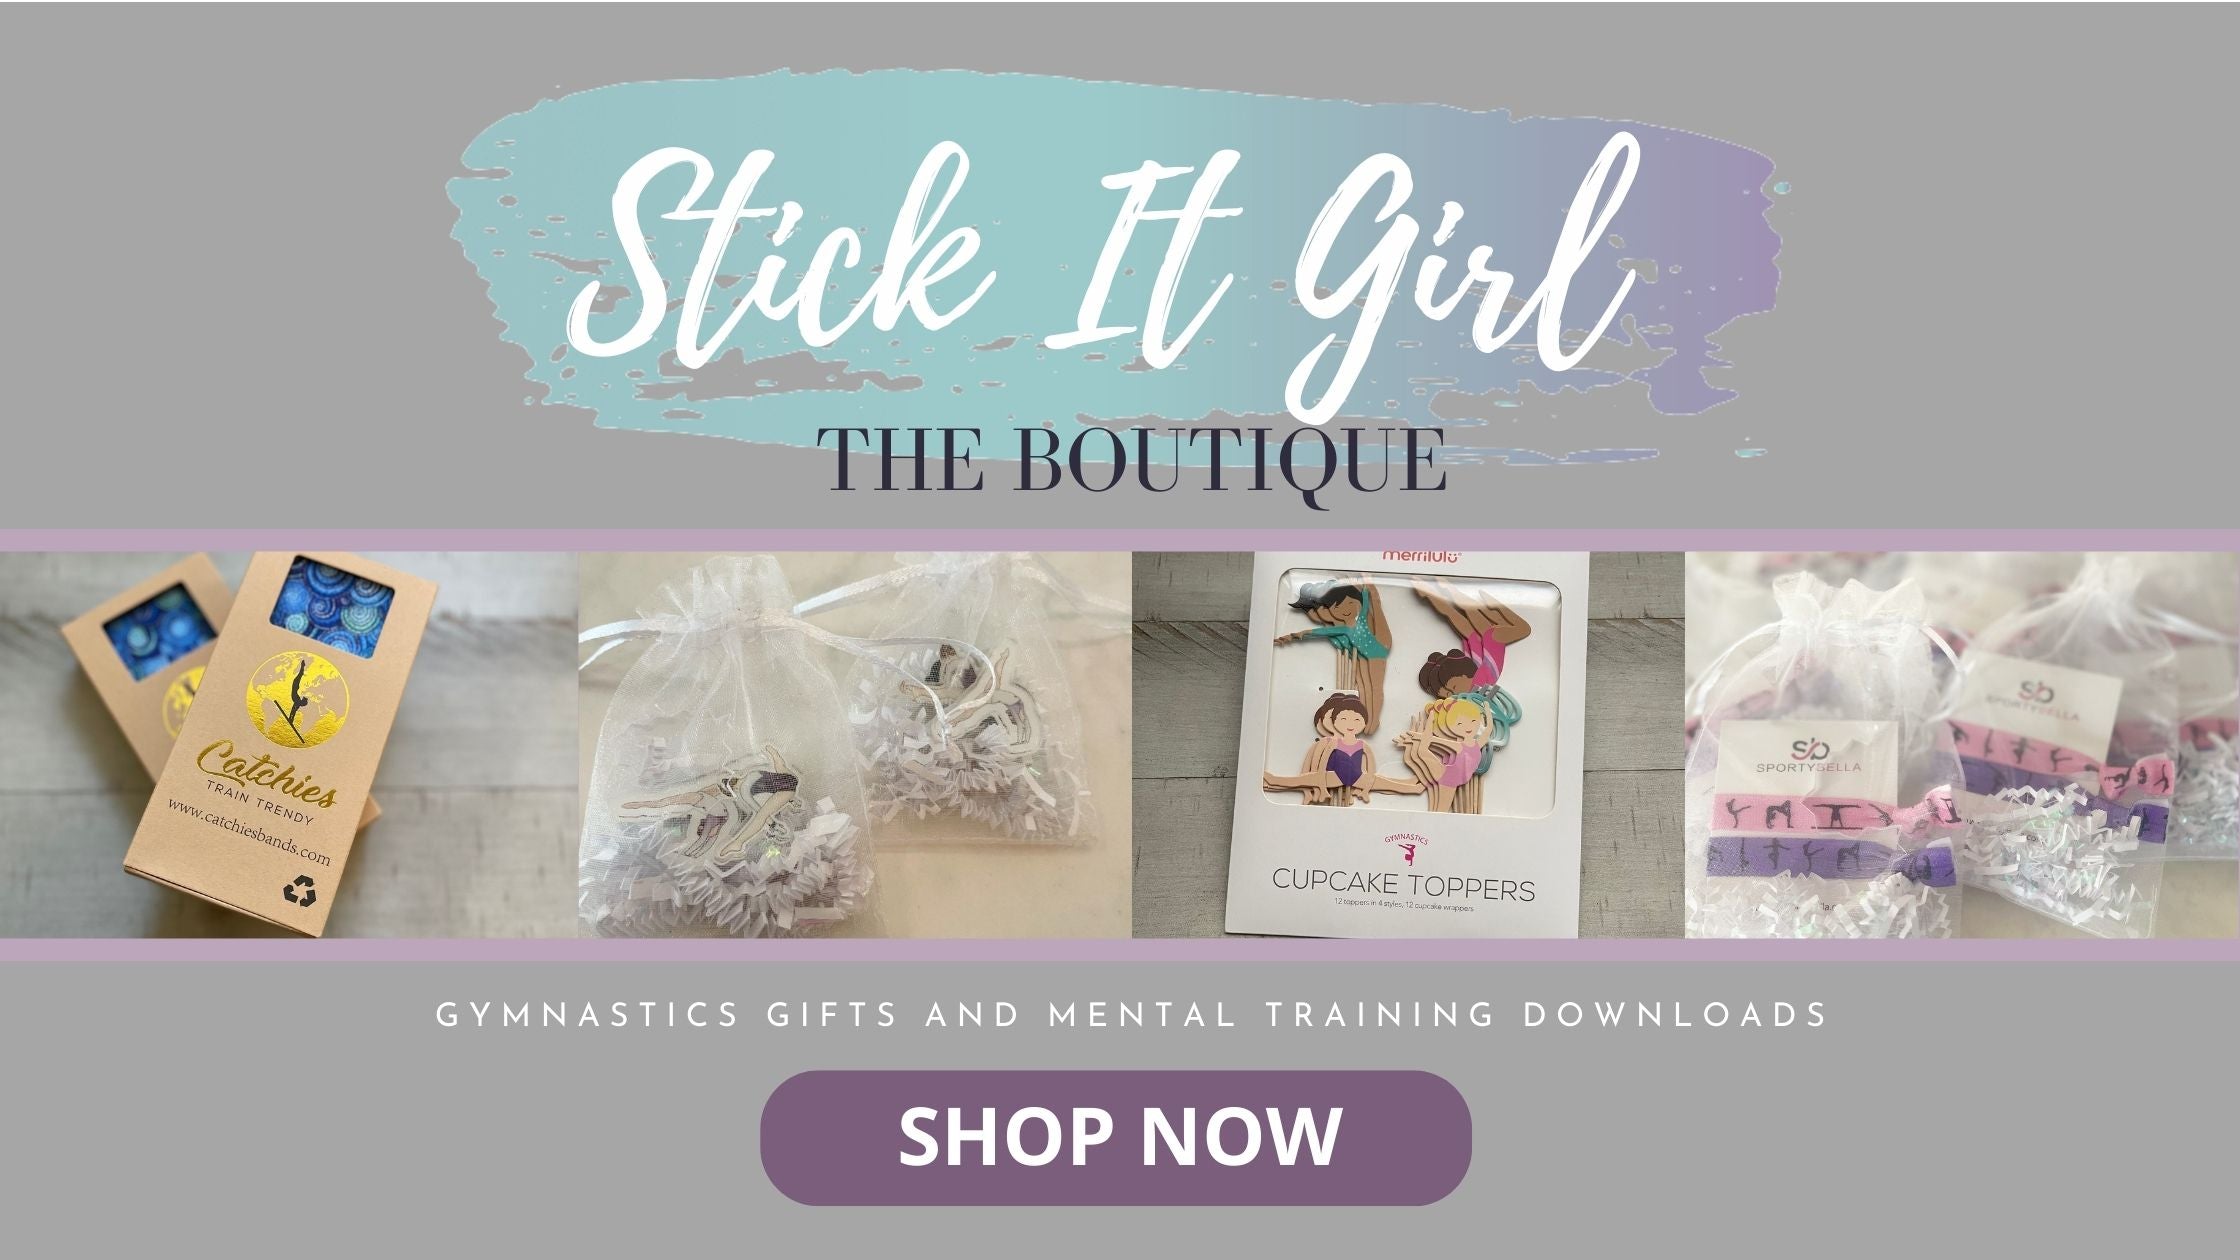 Shop gymnastics gifts and more at the Stick It Girl Boutique